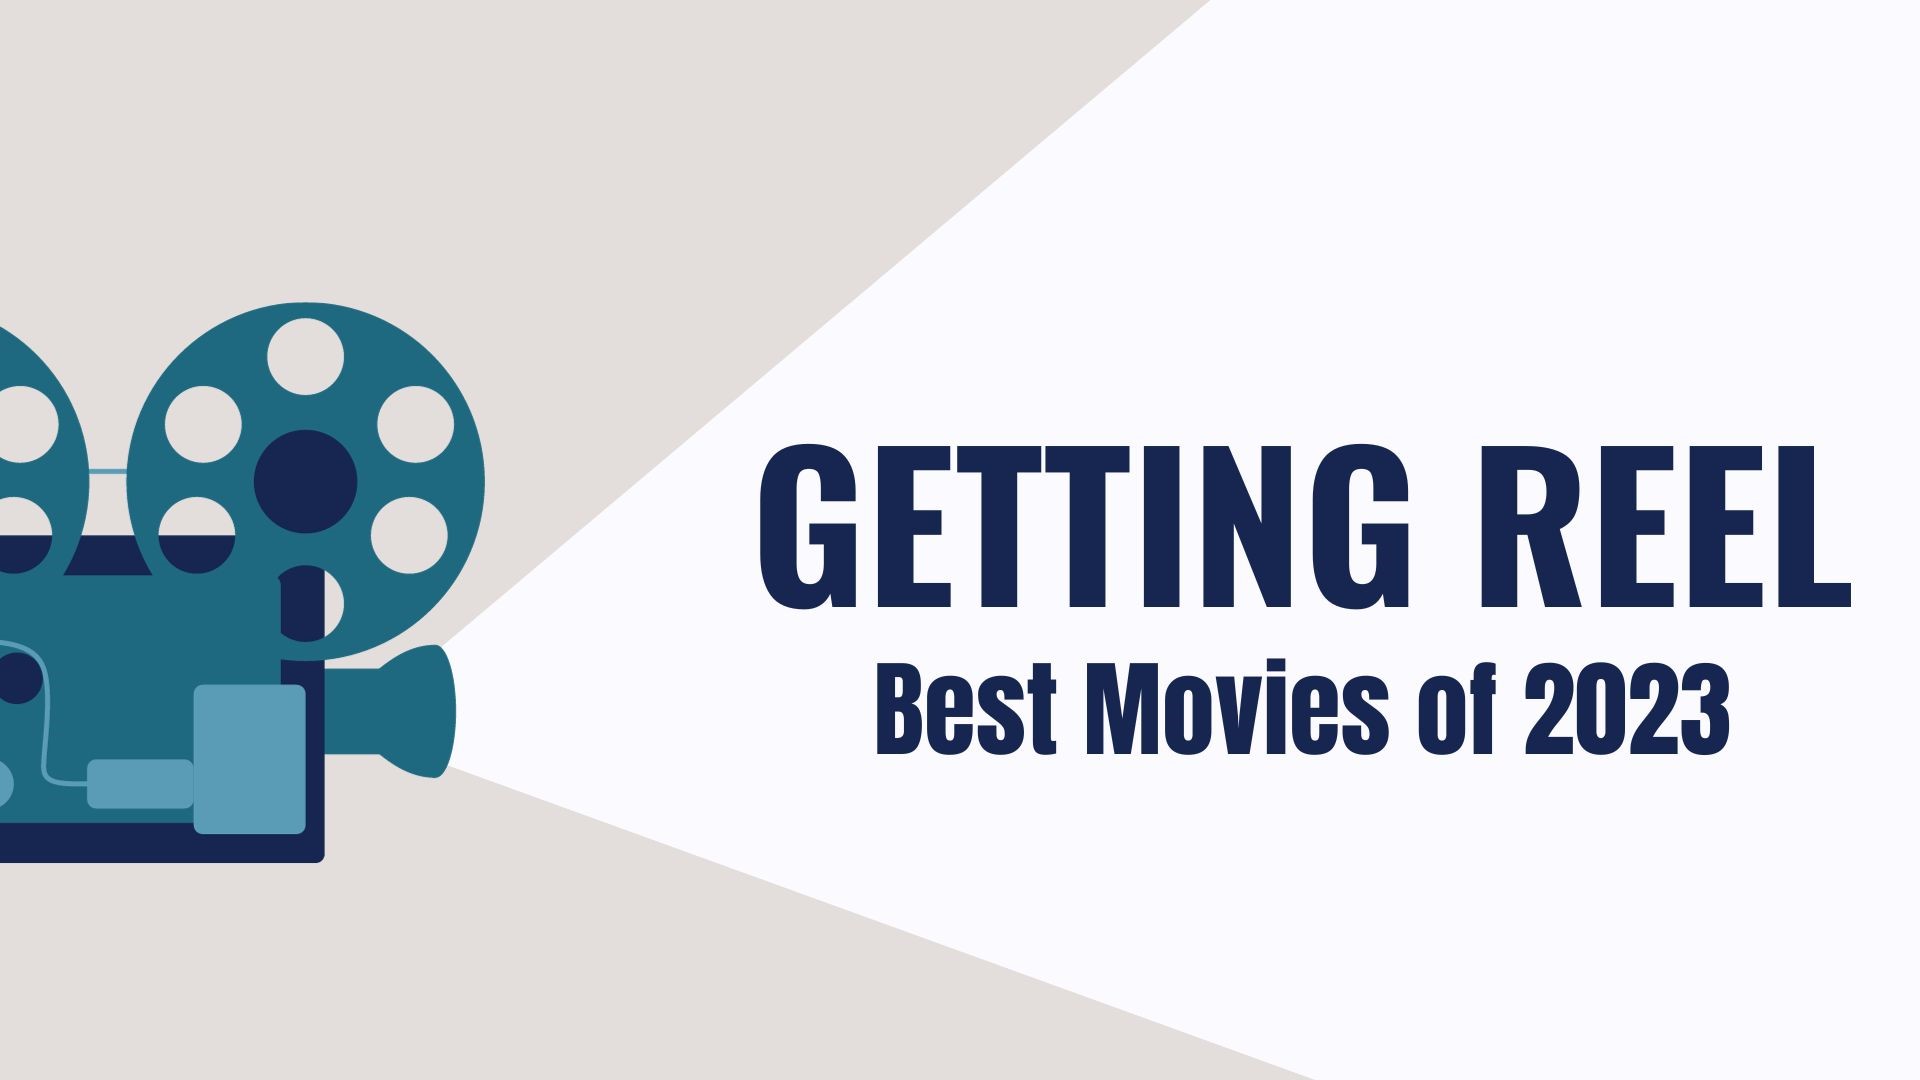 KTHV movie reviewers discuss their favorite movies of 2023 and recap the year's top movies.